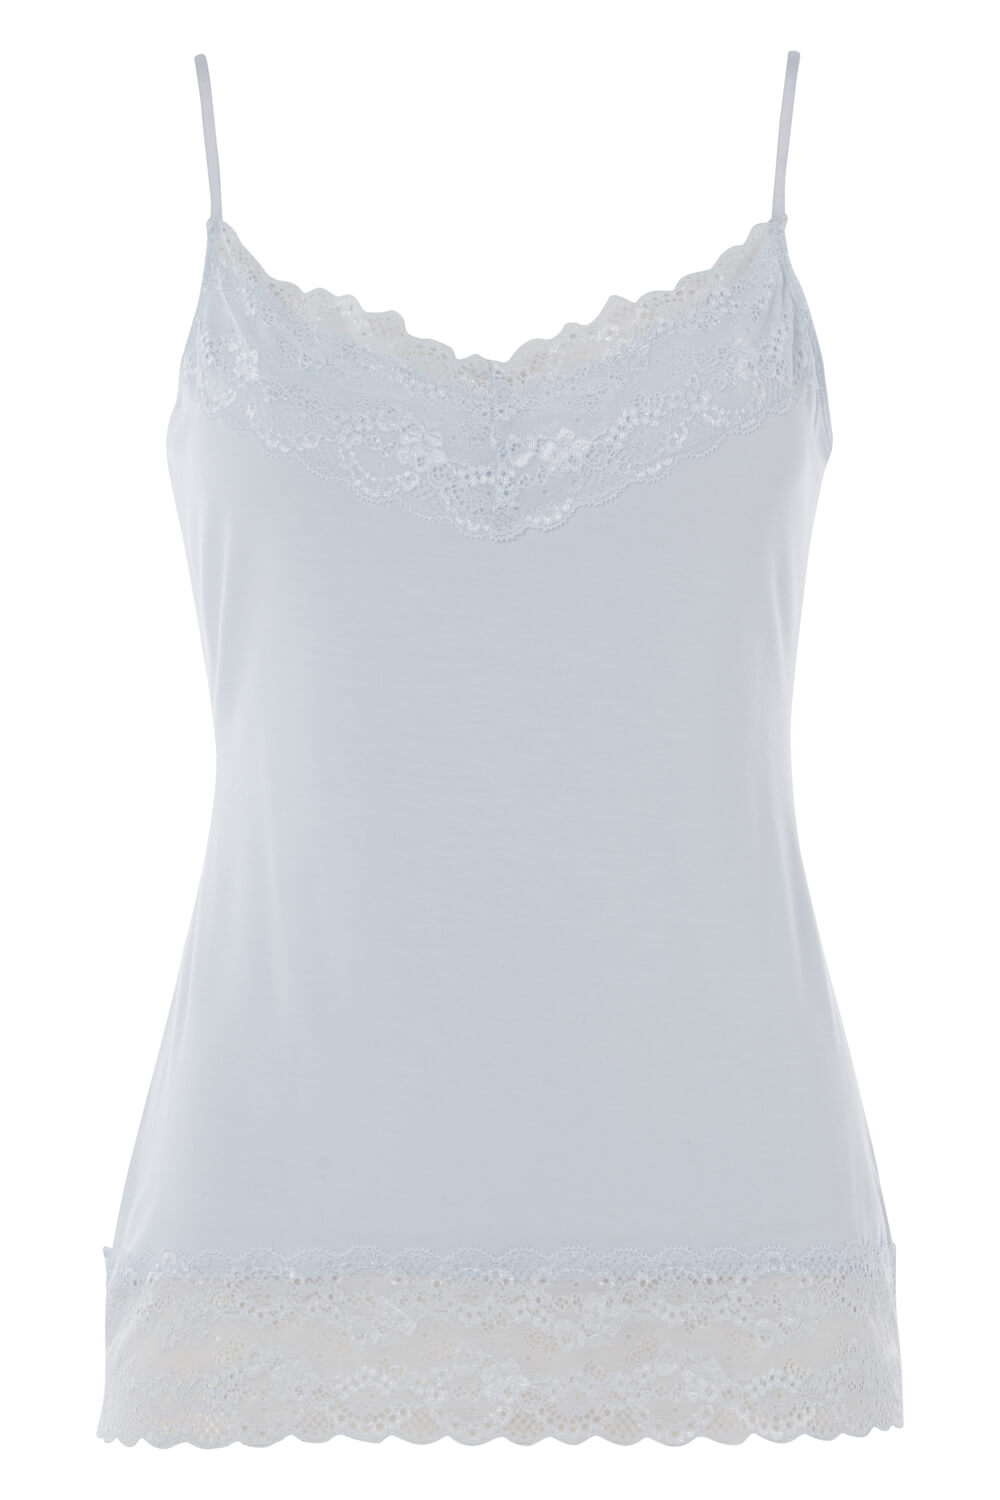 Light Grey Lace Trim Camisole Top, Image 5 of 9